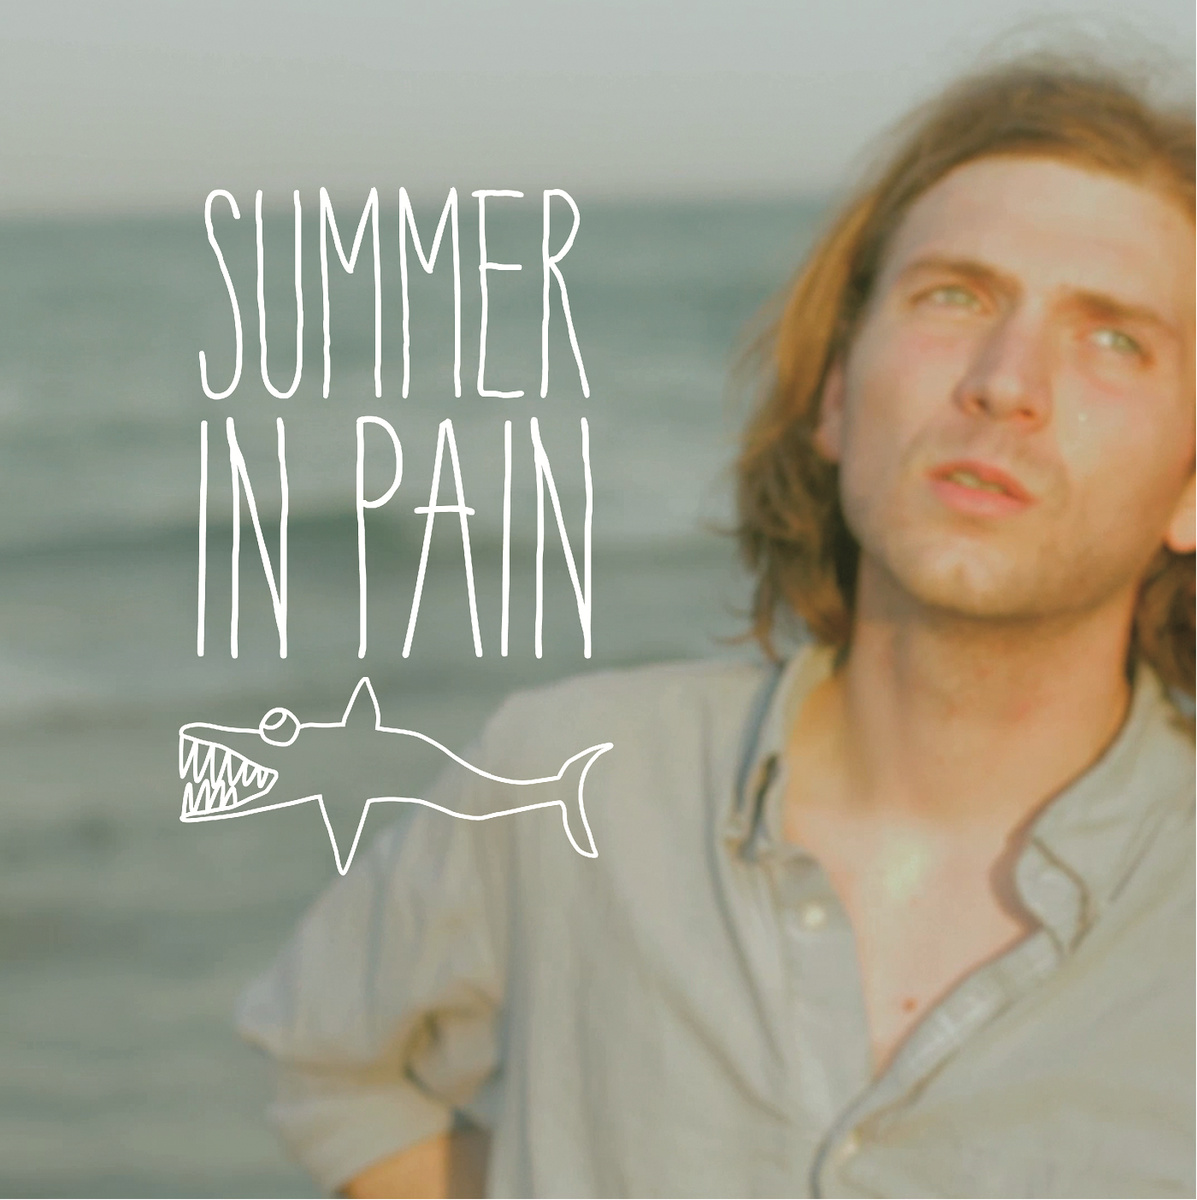 Jimmy-Whispers-Summer-In-Pain.